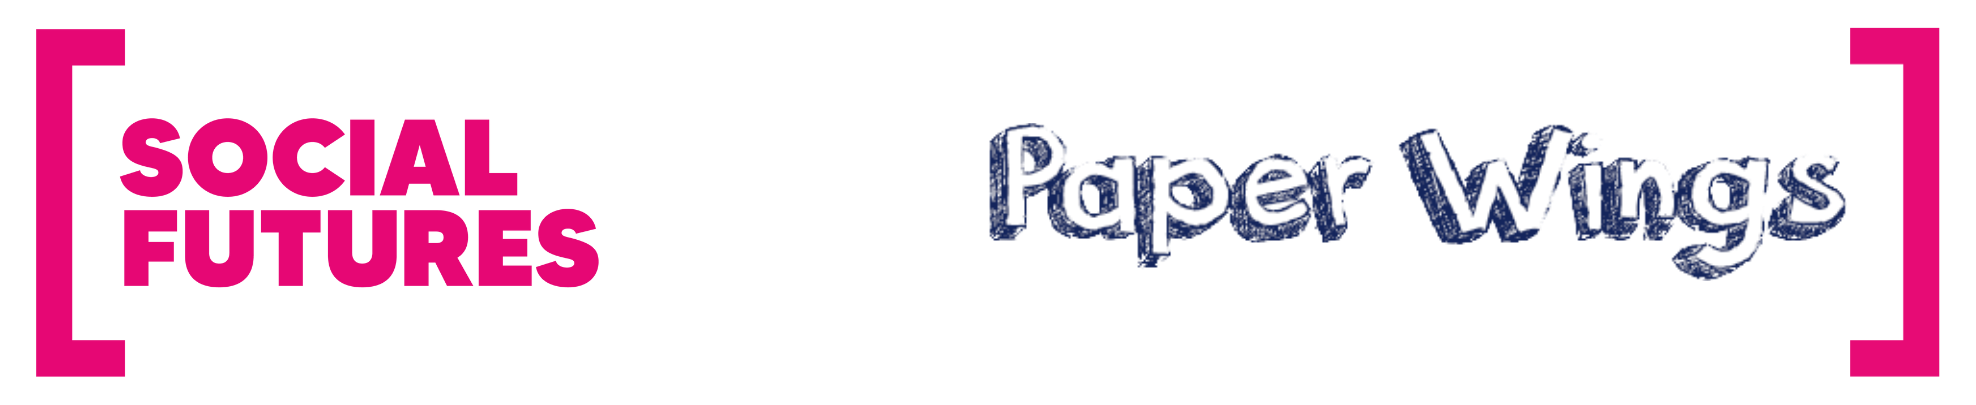 SOCIAL-FUTURES-AND-PAPER-WINGS-LOGO